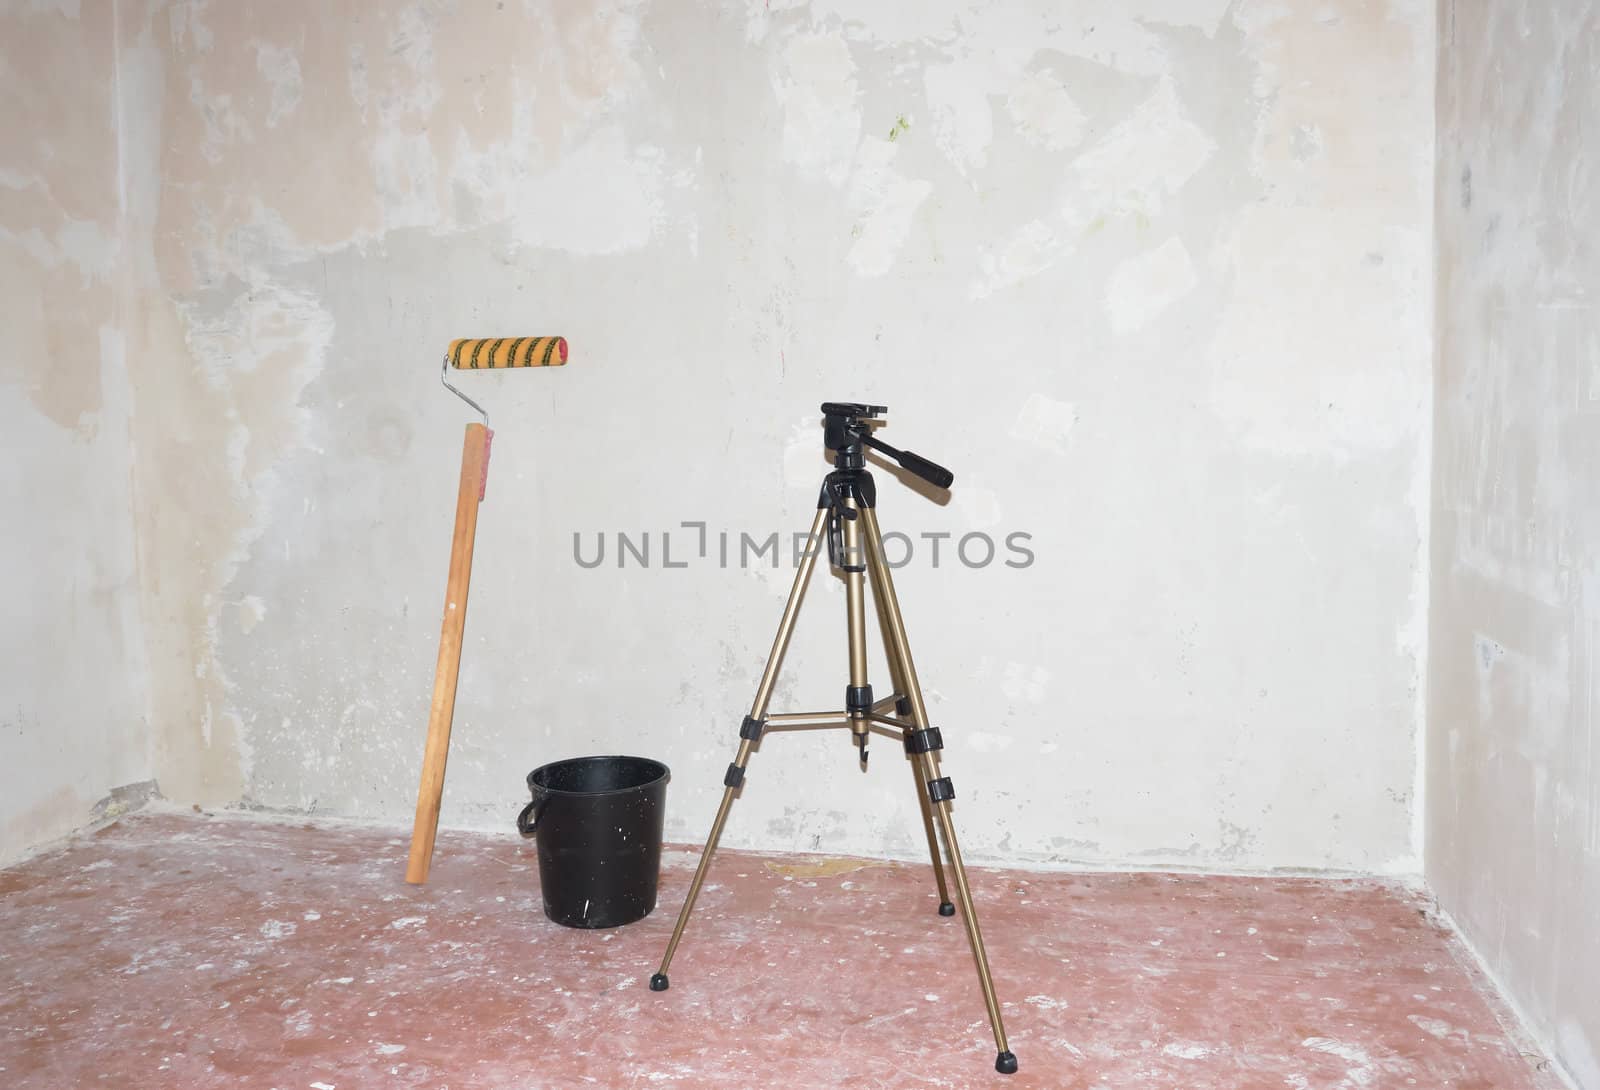 Roller for  putty, bucket and a tripod against the background of putty walls